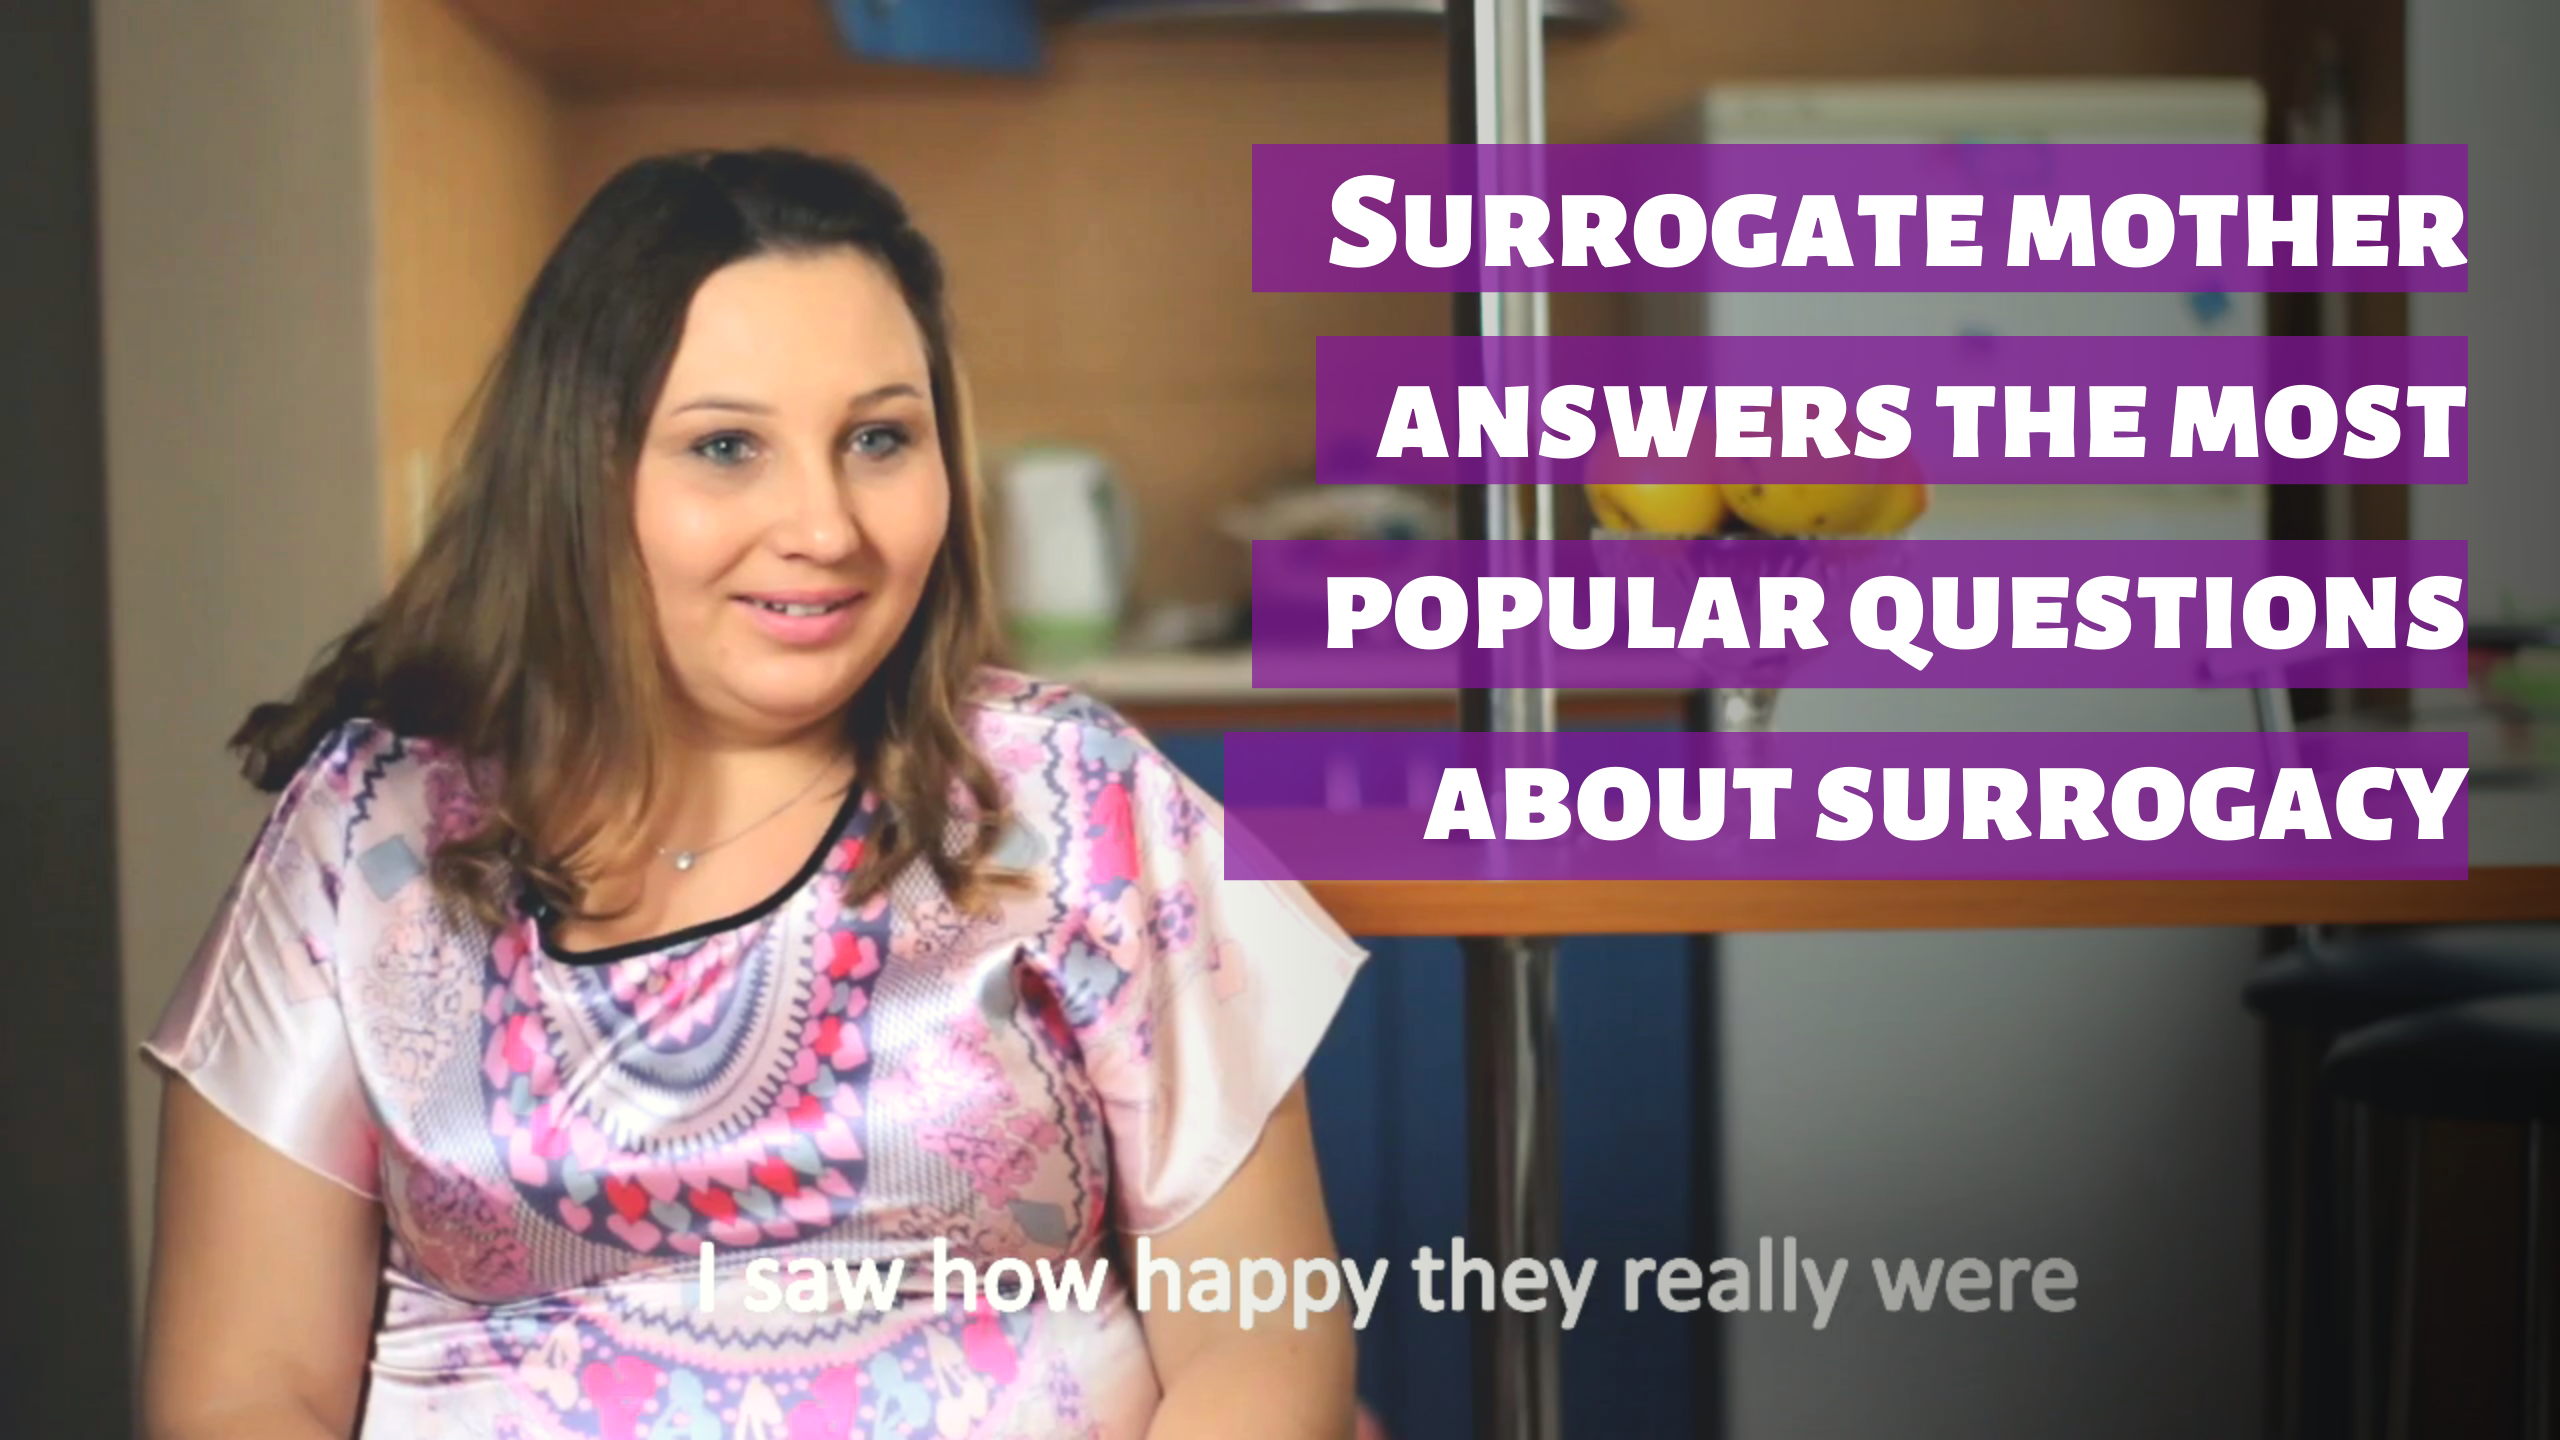 Interview with <br>a surrogate mother